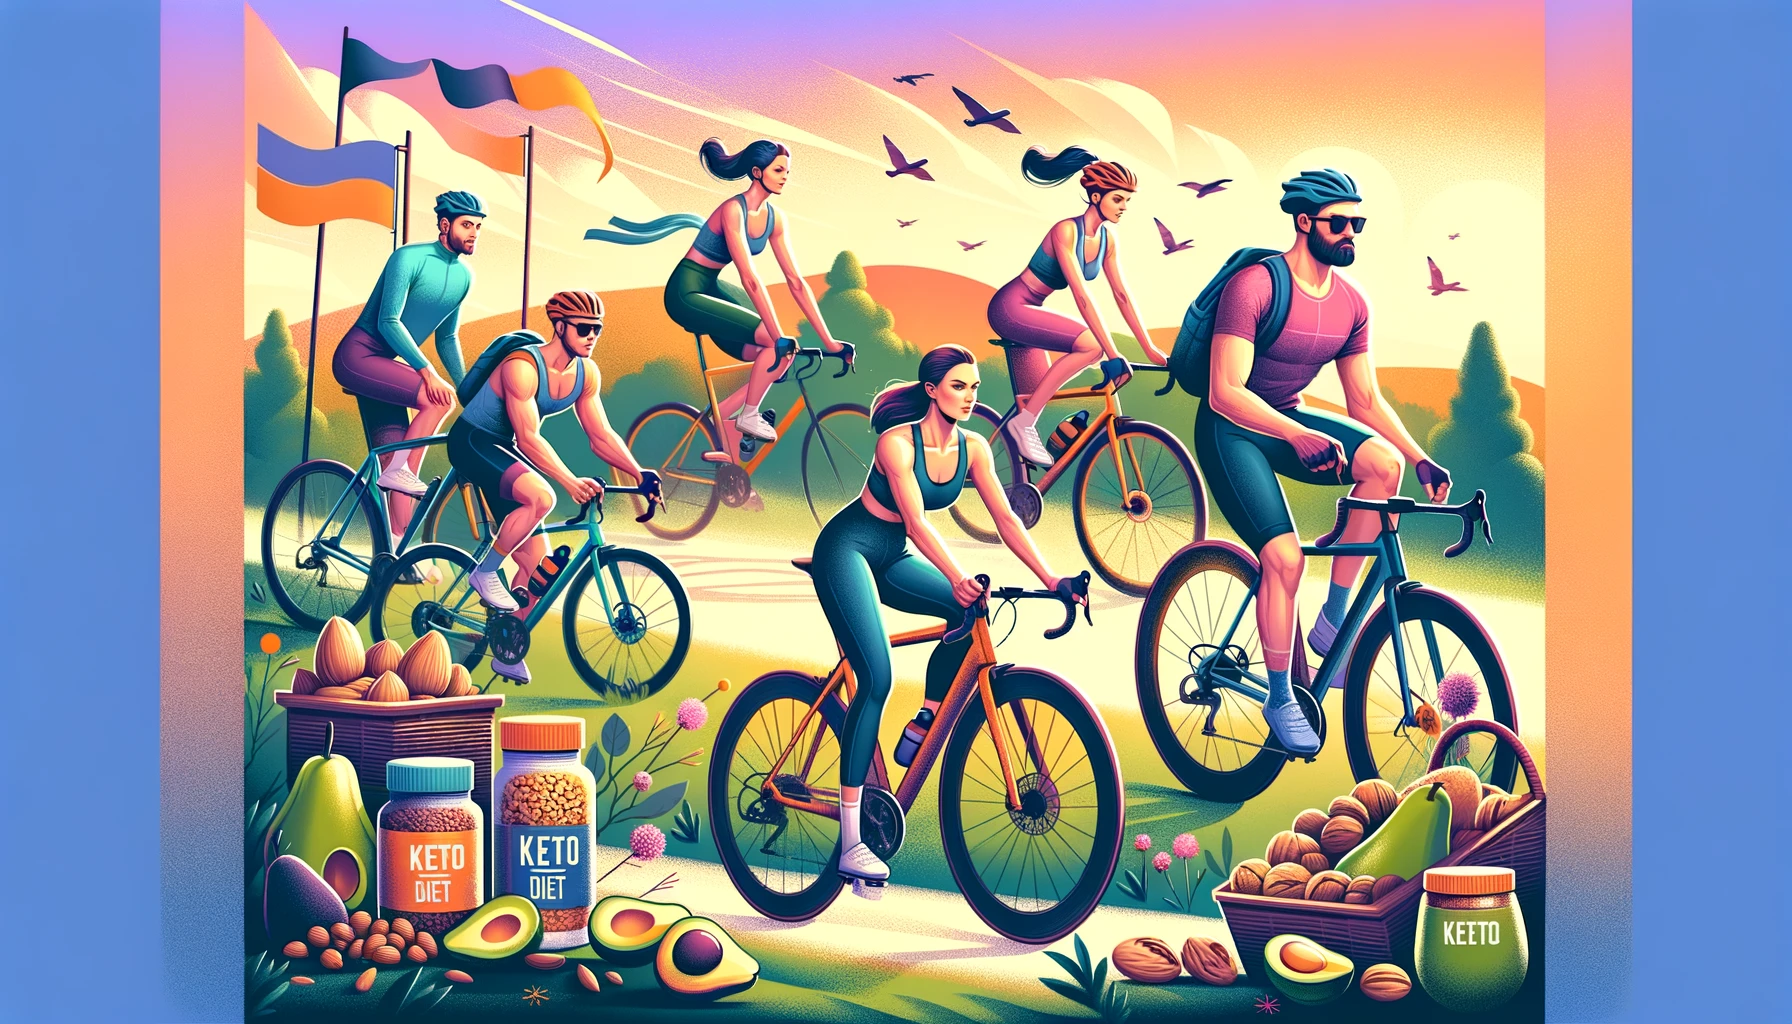 Cyclists on a keto diet. The scene includes a diverse group of cyclists, both male and female,